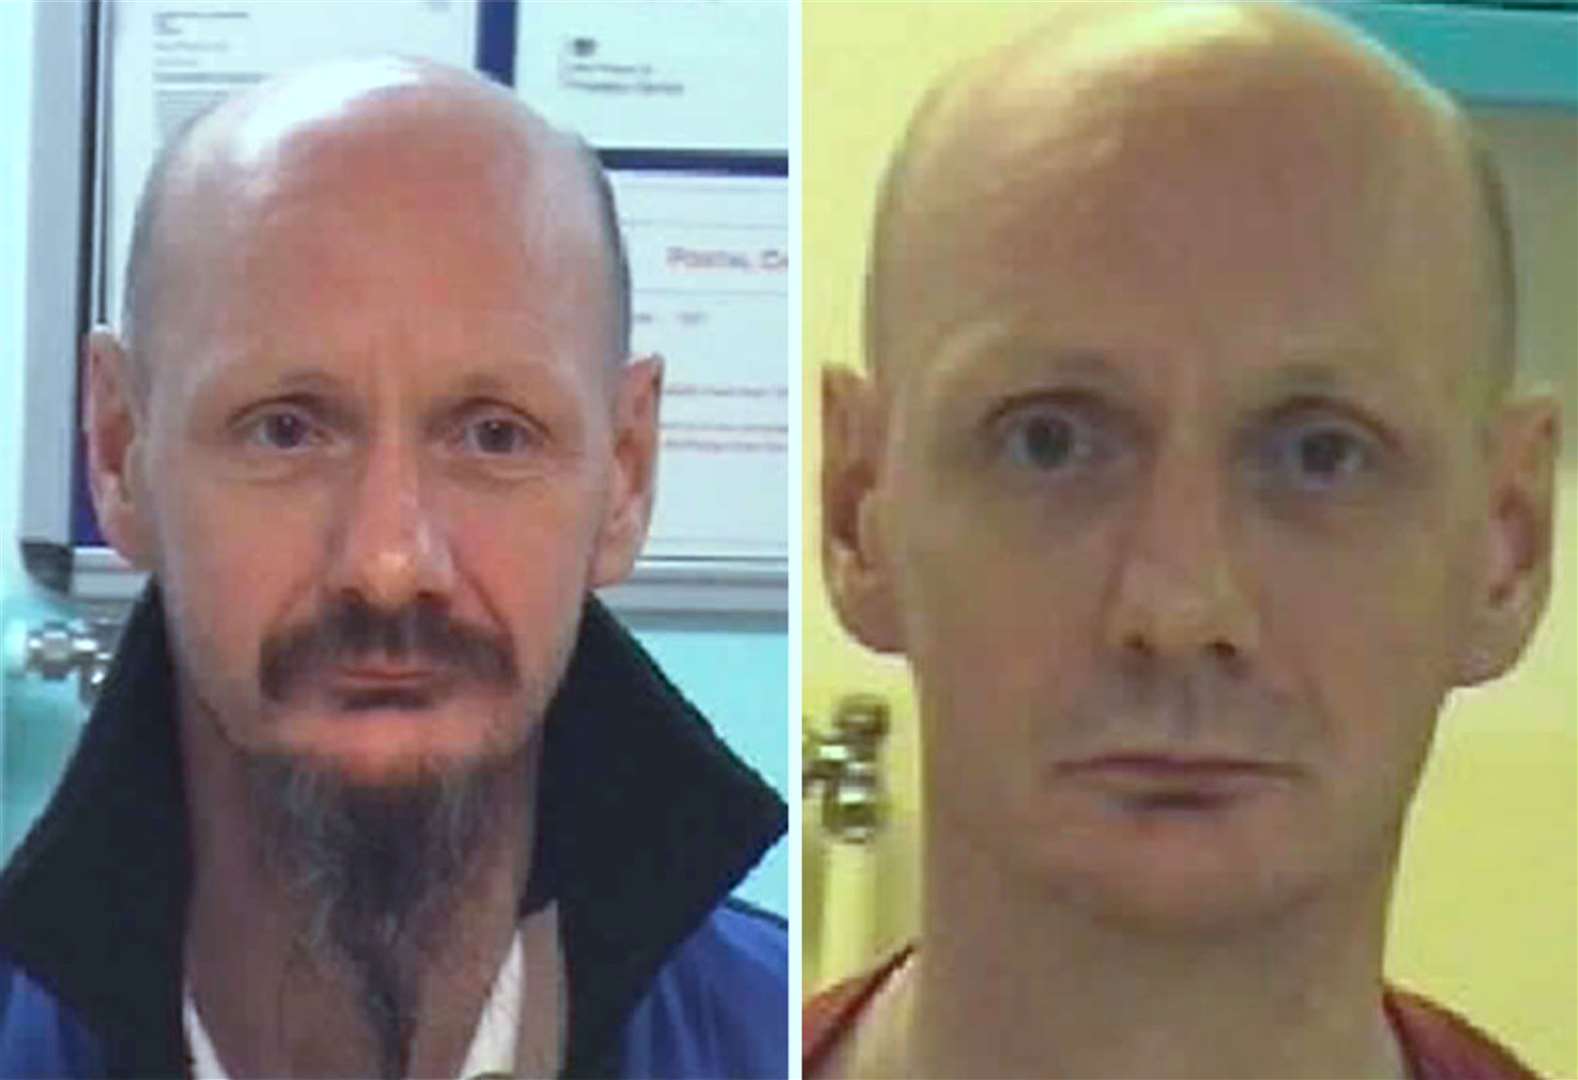 Paul Robson absconded from HMP North Sea Camp in February (Lincolnshire Police/PA)